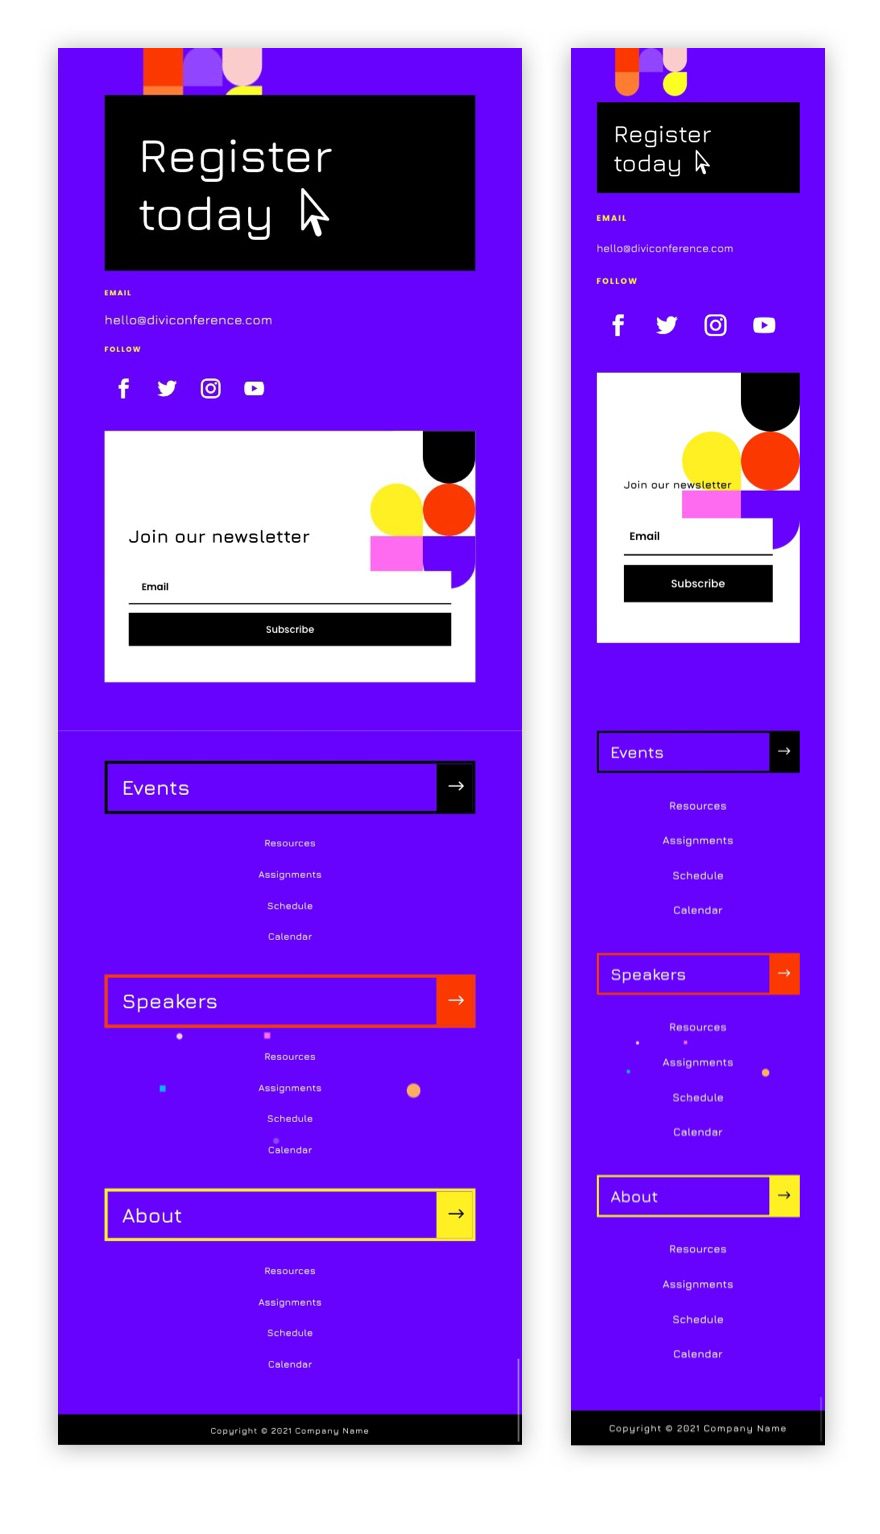 divi virtual conference header footer template